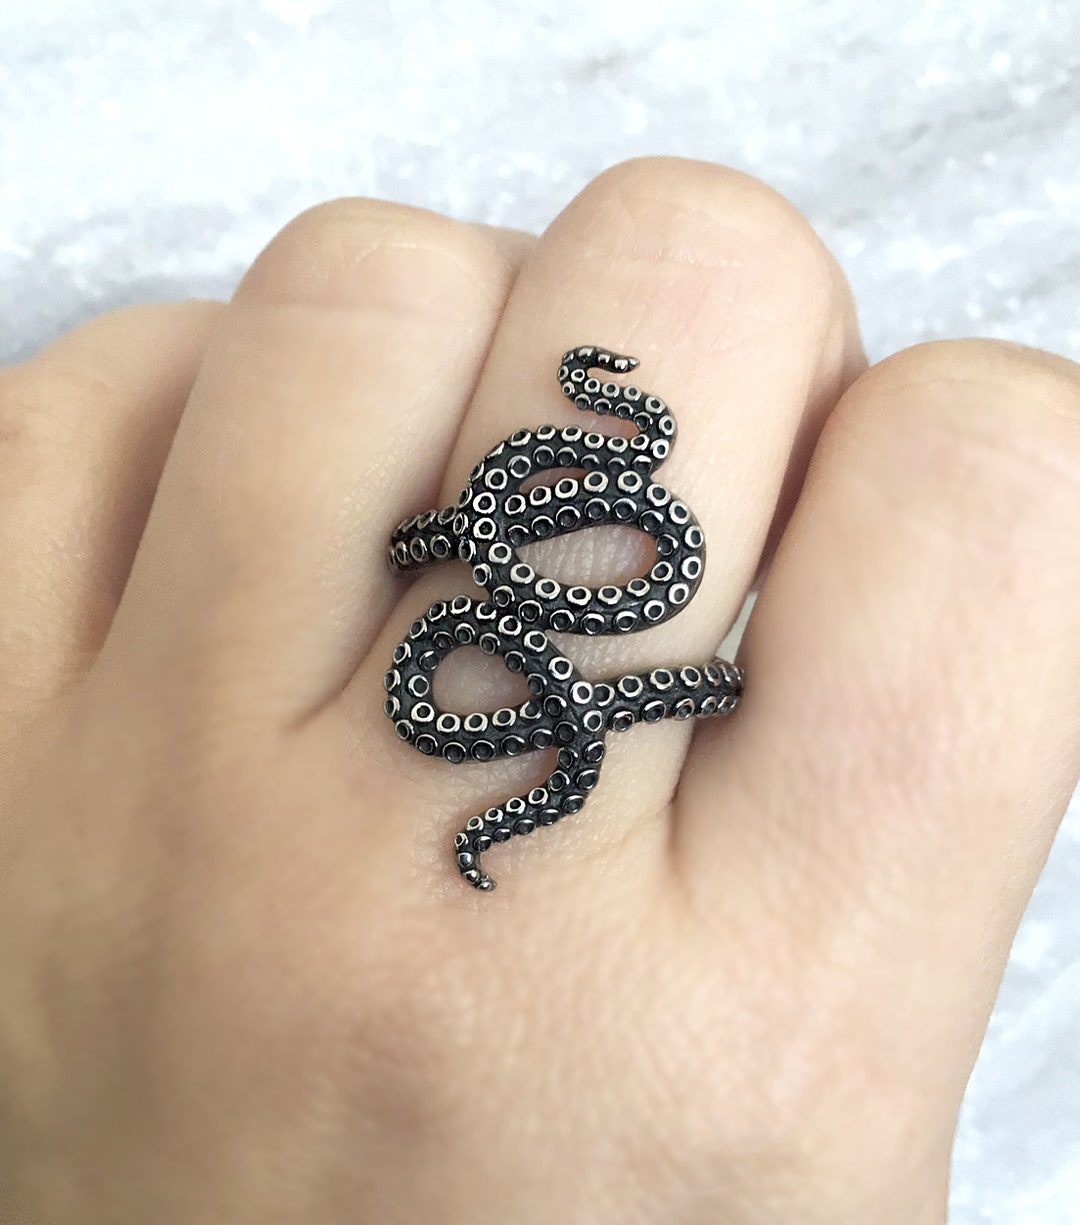 Octopus ring, Octopus tentacle ring, Gothic ring, Oxidized ring, octopus tentacle jewelry, octopus jewelry, unisex ring